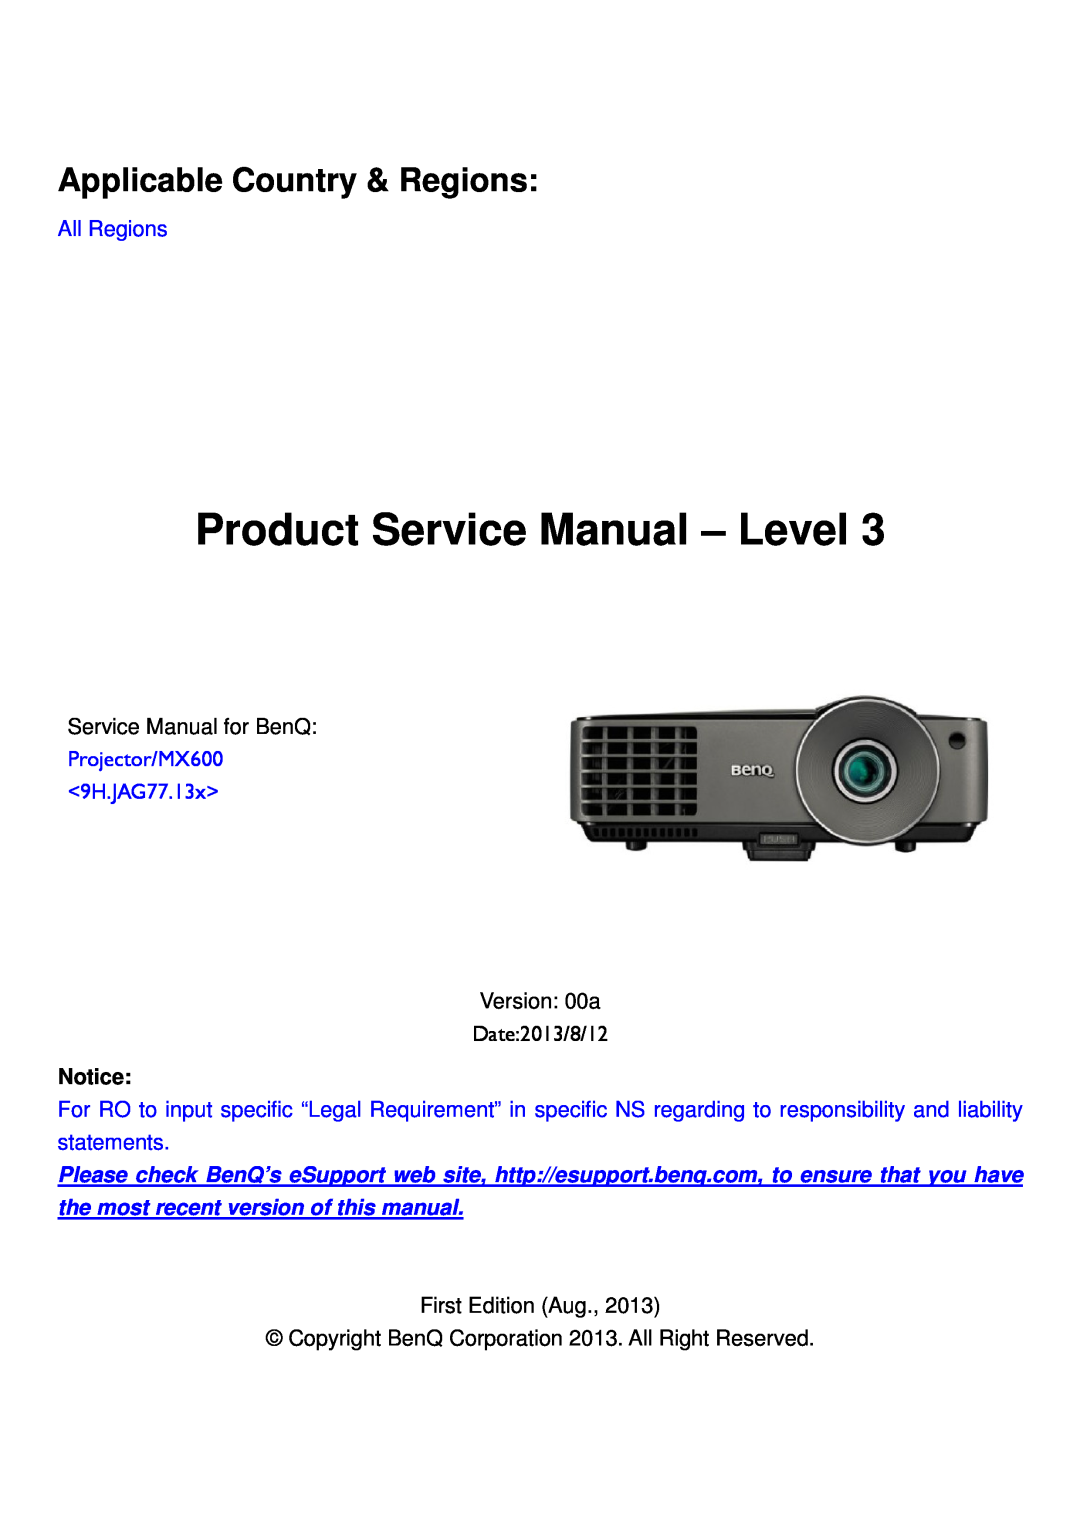 BenQ MX600 service manual Product Service Manual - Level, Applicable Country & Regions, All Regions, Date2013/8/12 